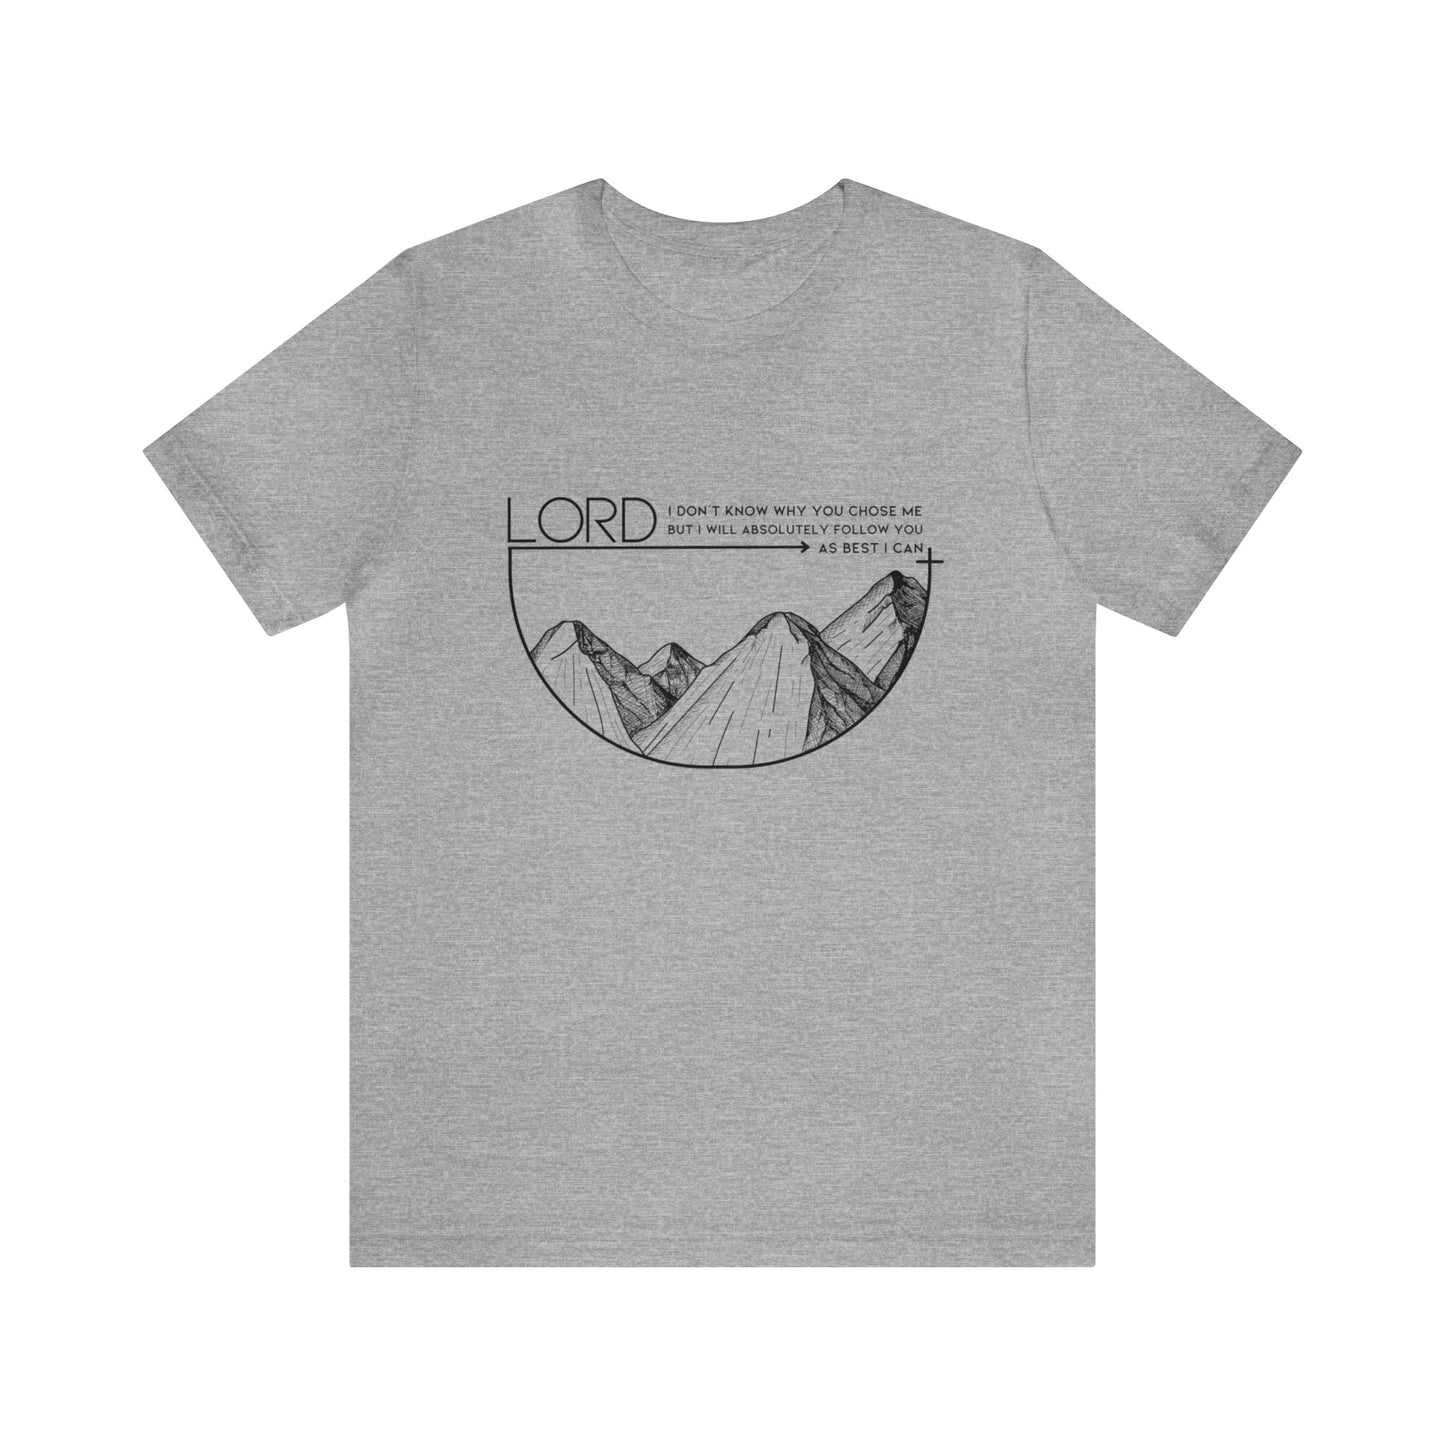 Follow the Lord, Express Delivery, Christian T-shirt for Men and Women